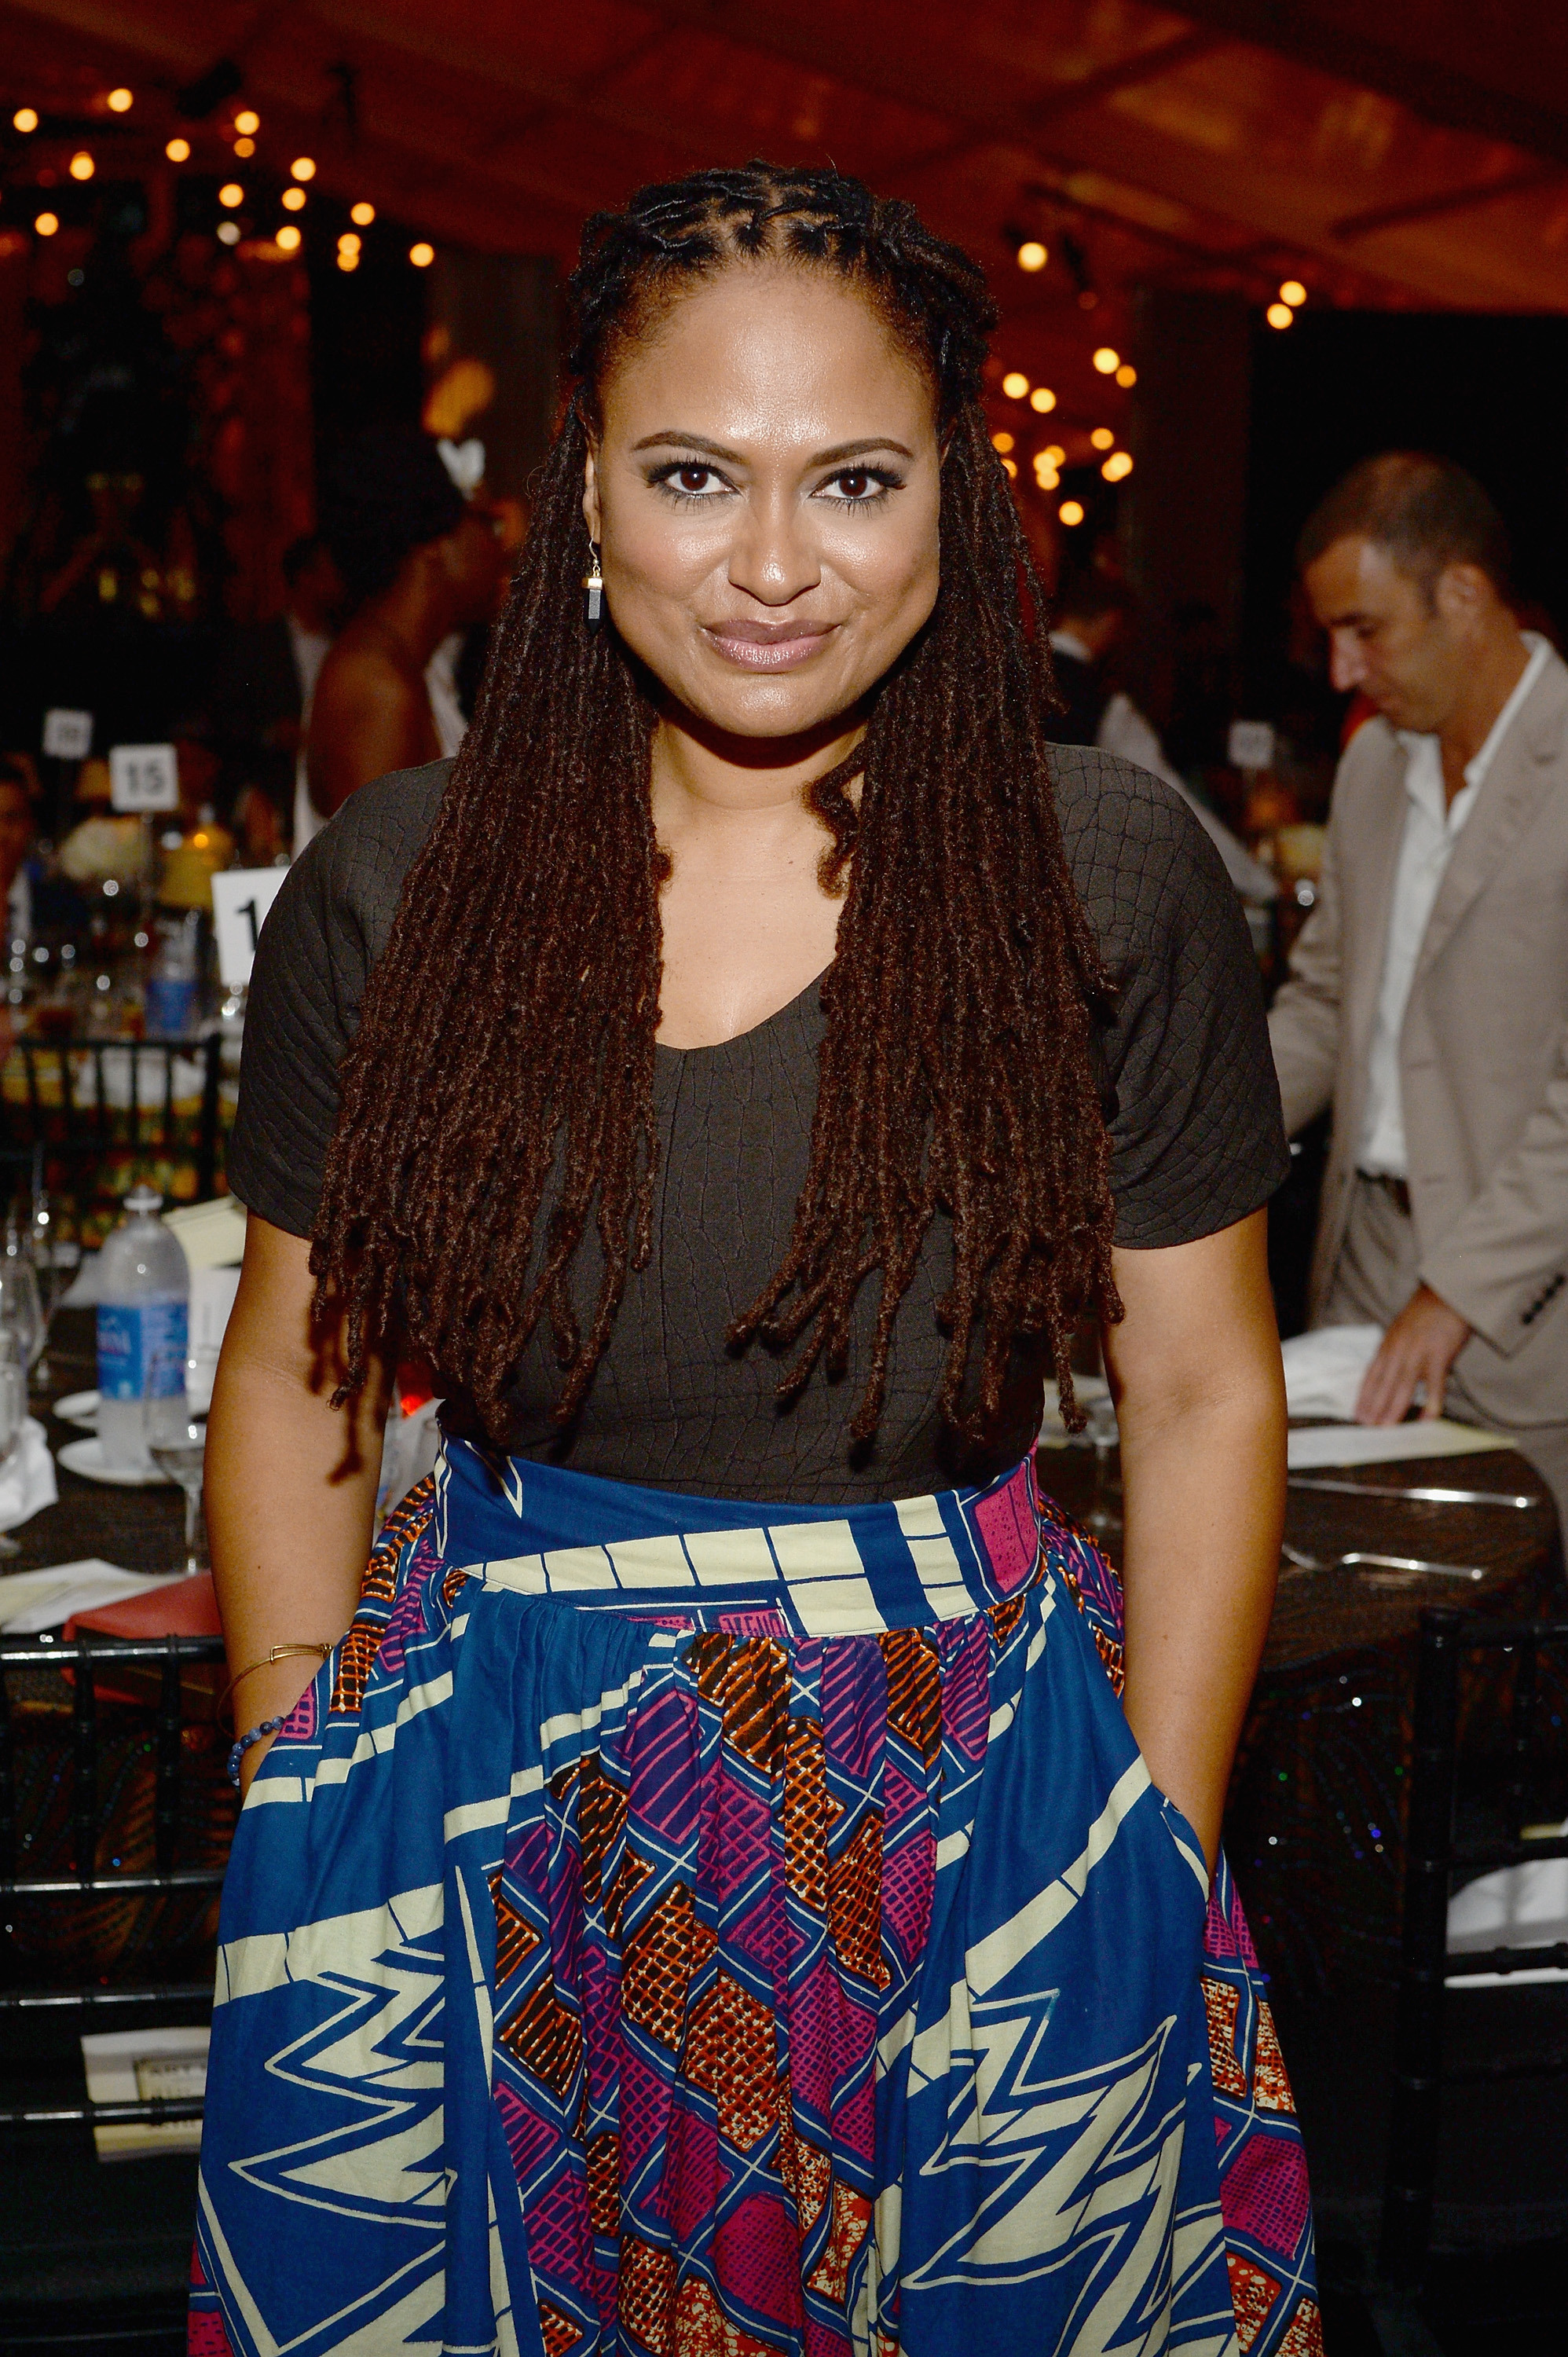 Ava DuVernay attends as Russell Simmons' Rush Philanthropic Arts Foundation Celebrates 20th Anniversary At Annual Art For Life Benefit at Fairview Farms on July 18, 2015 in Water Mill, New York. (Andrew Toth&mdash;Getty Images)